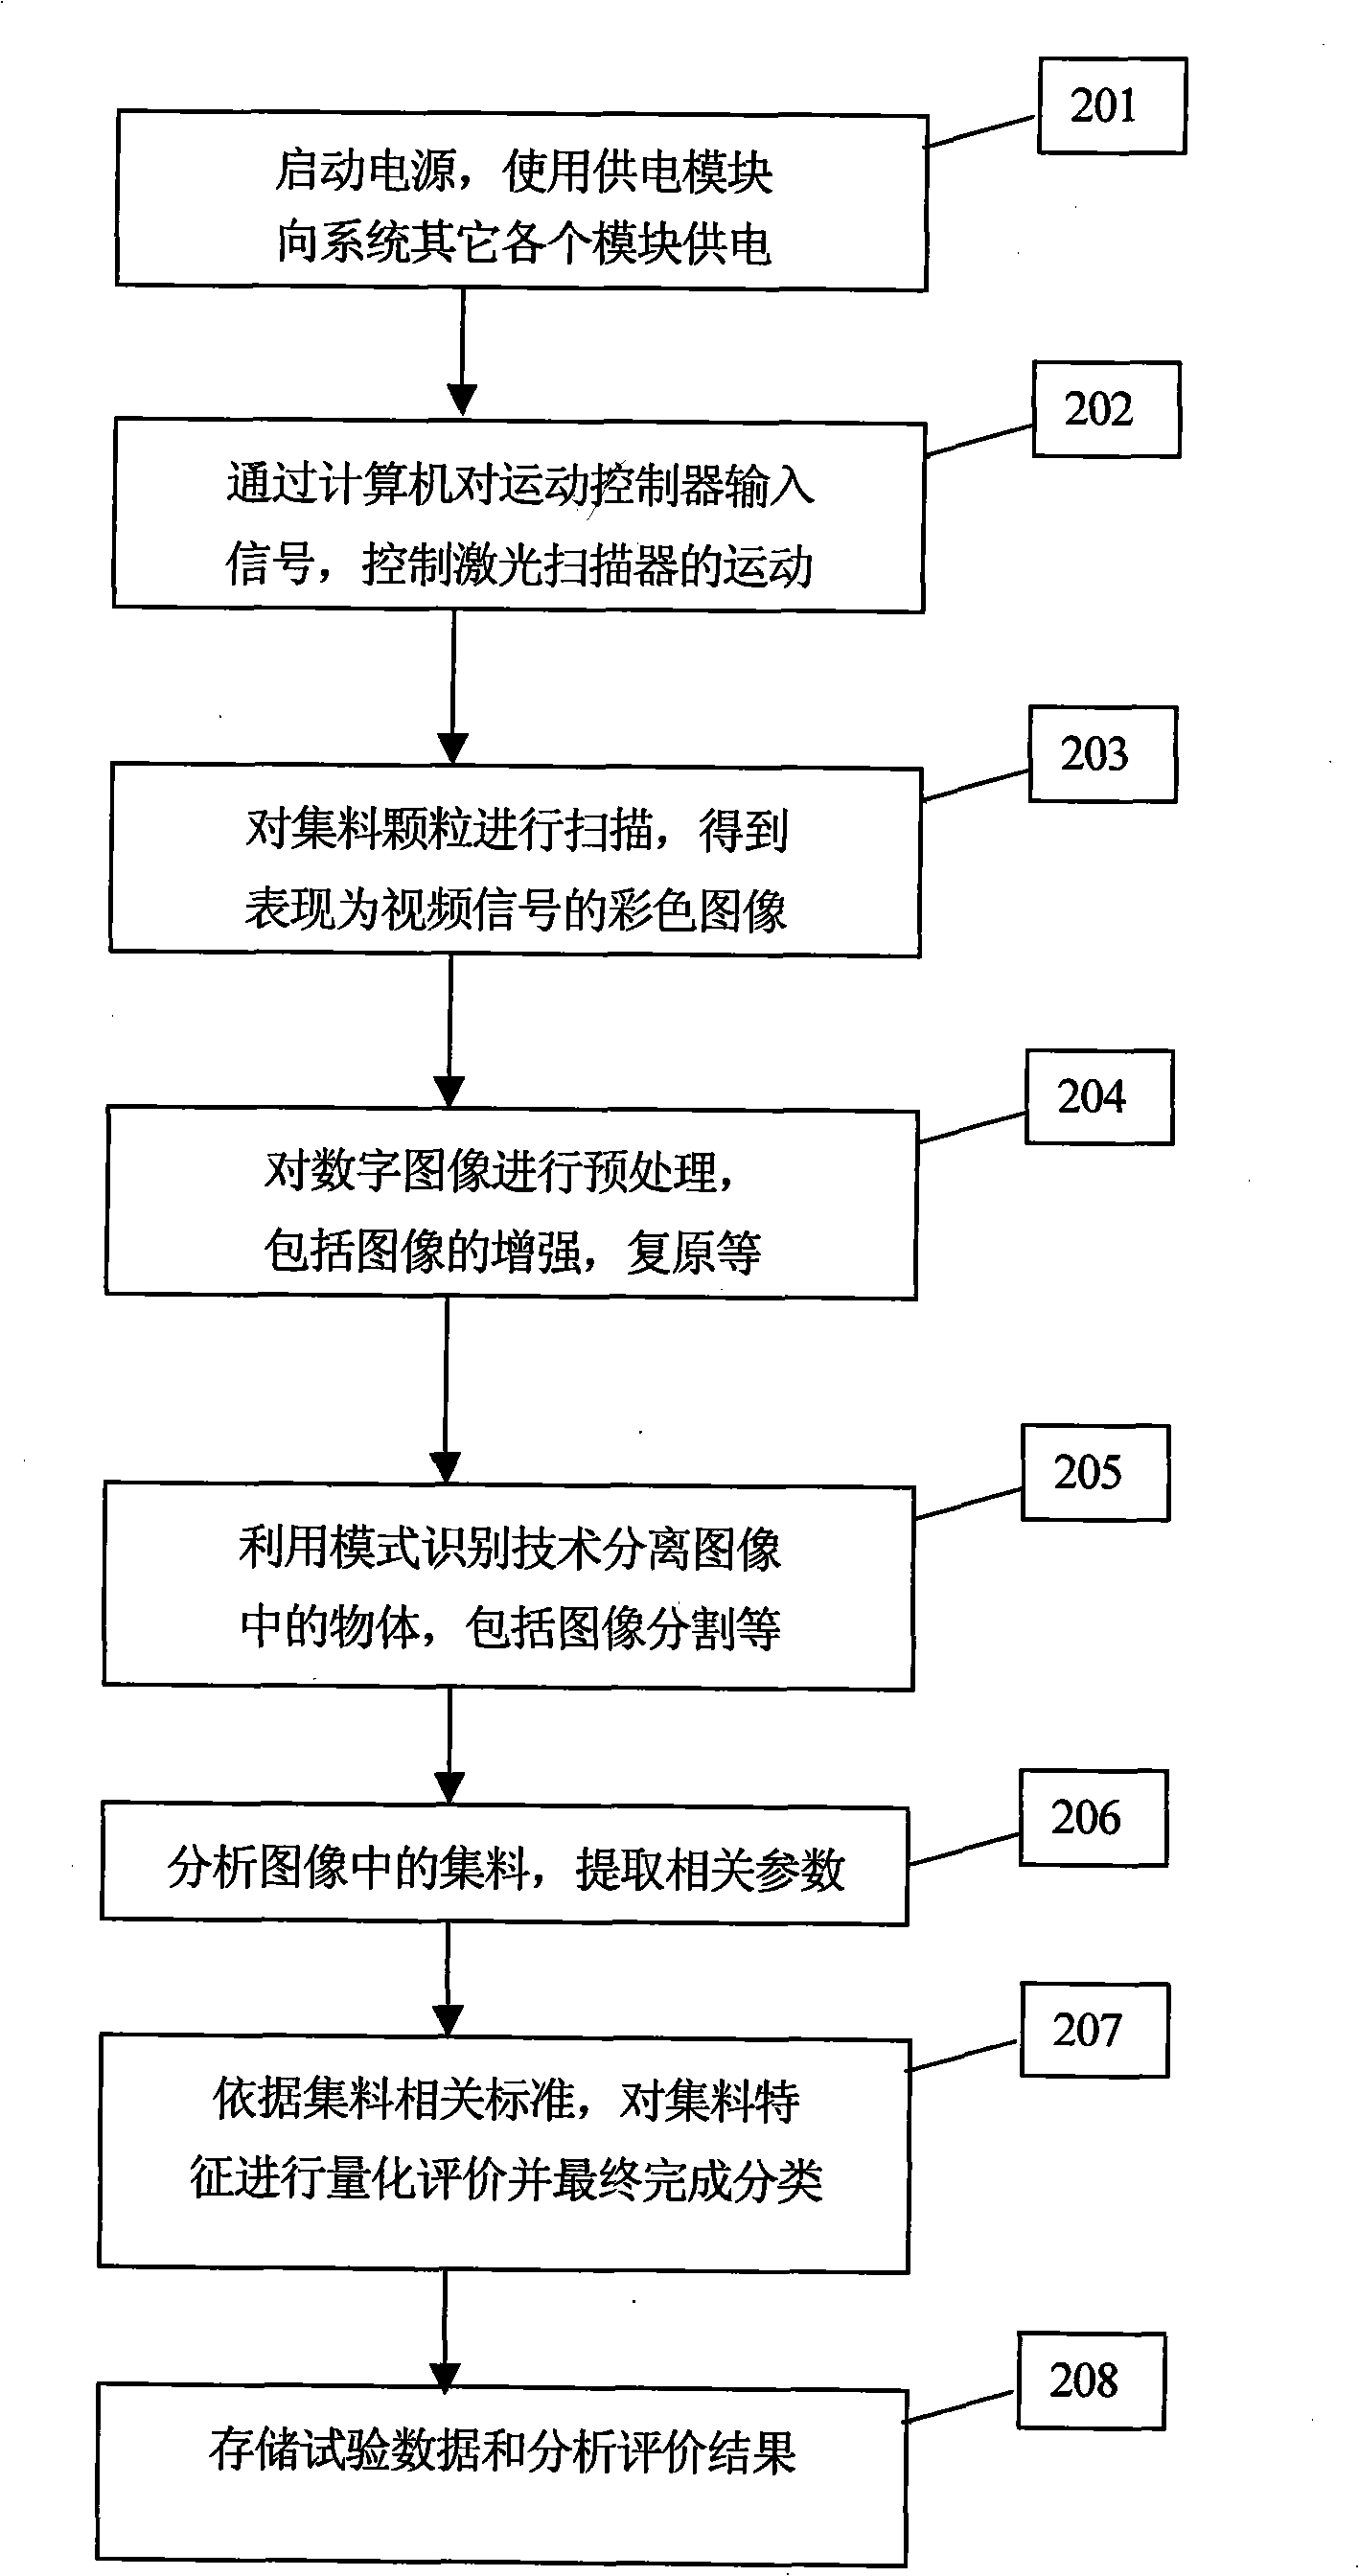 Method and system for evaluating aggregate digital image